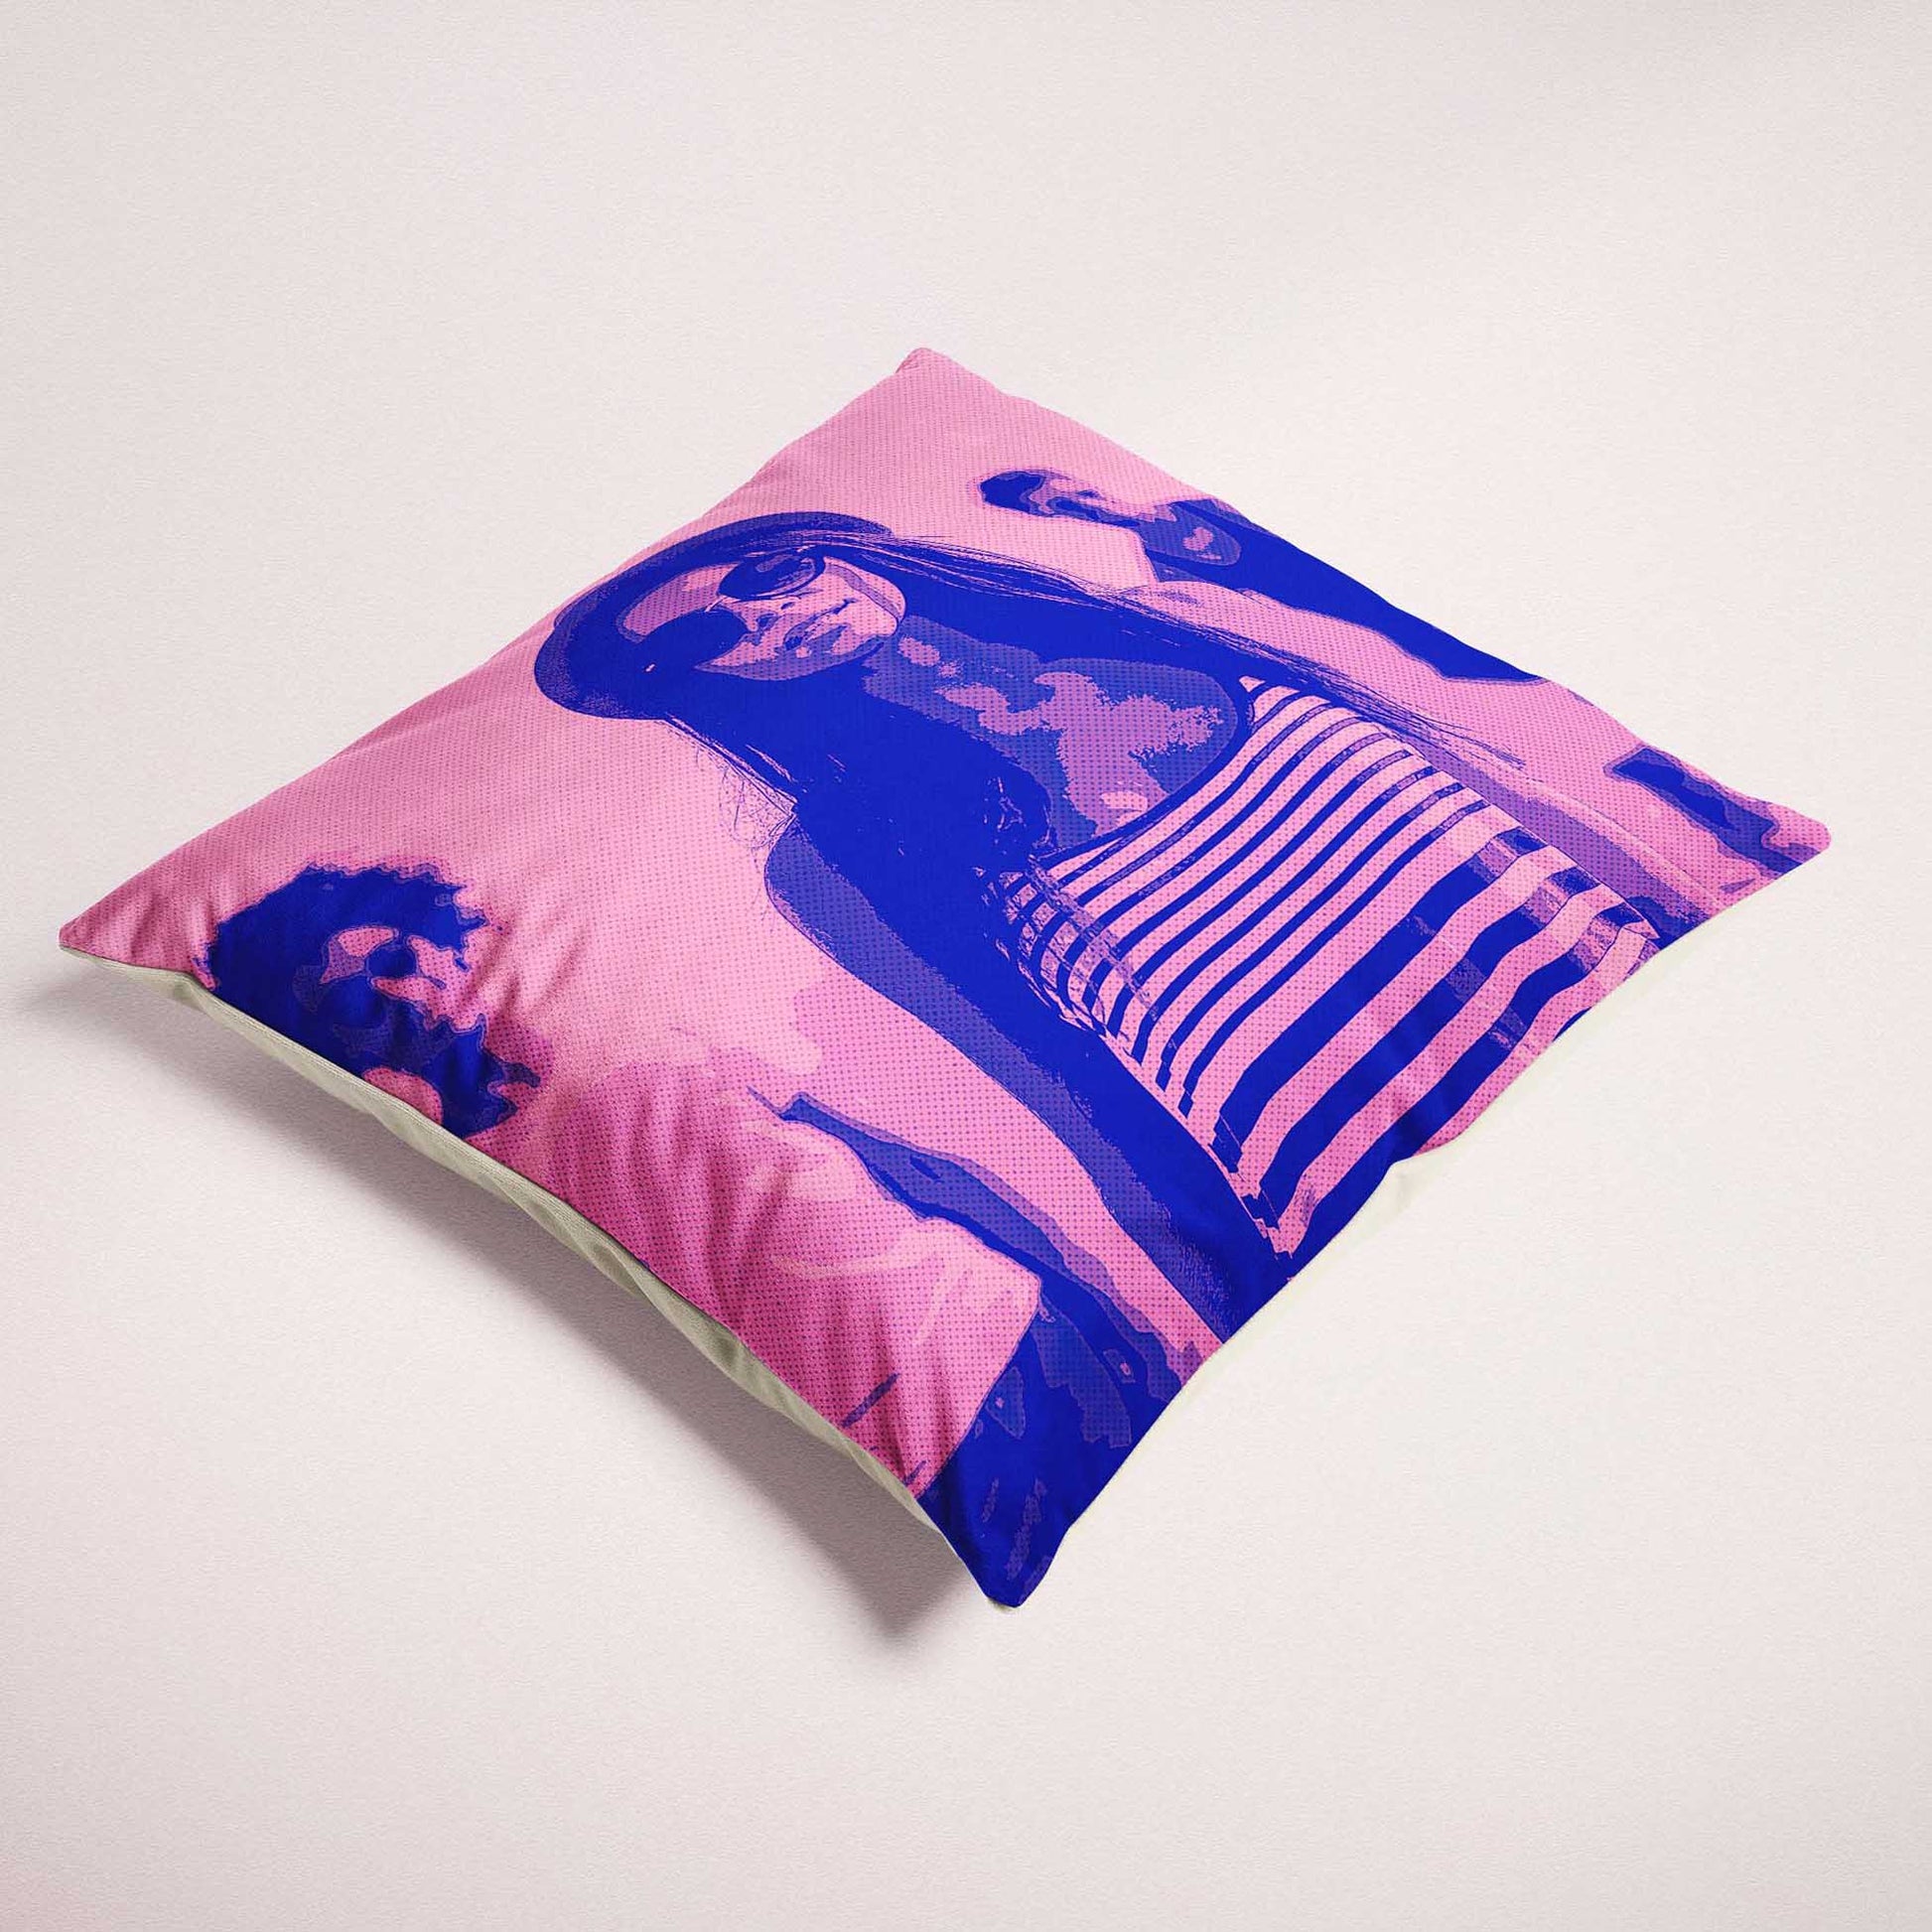 Immerse yourself in a world of retro fun with our Personalised Purple and Pink Comics Cushion. Transform your photo into a personalized cartoon artwork, featuring vibrant colors and a fresh old-school style. Handmade with soft velvet